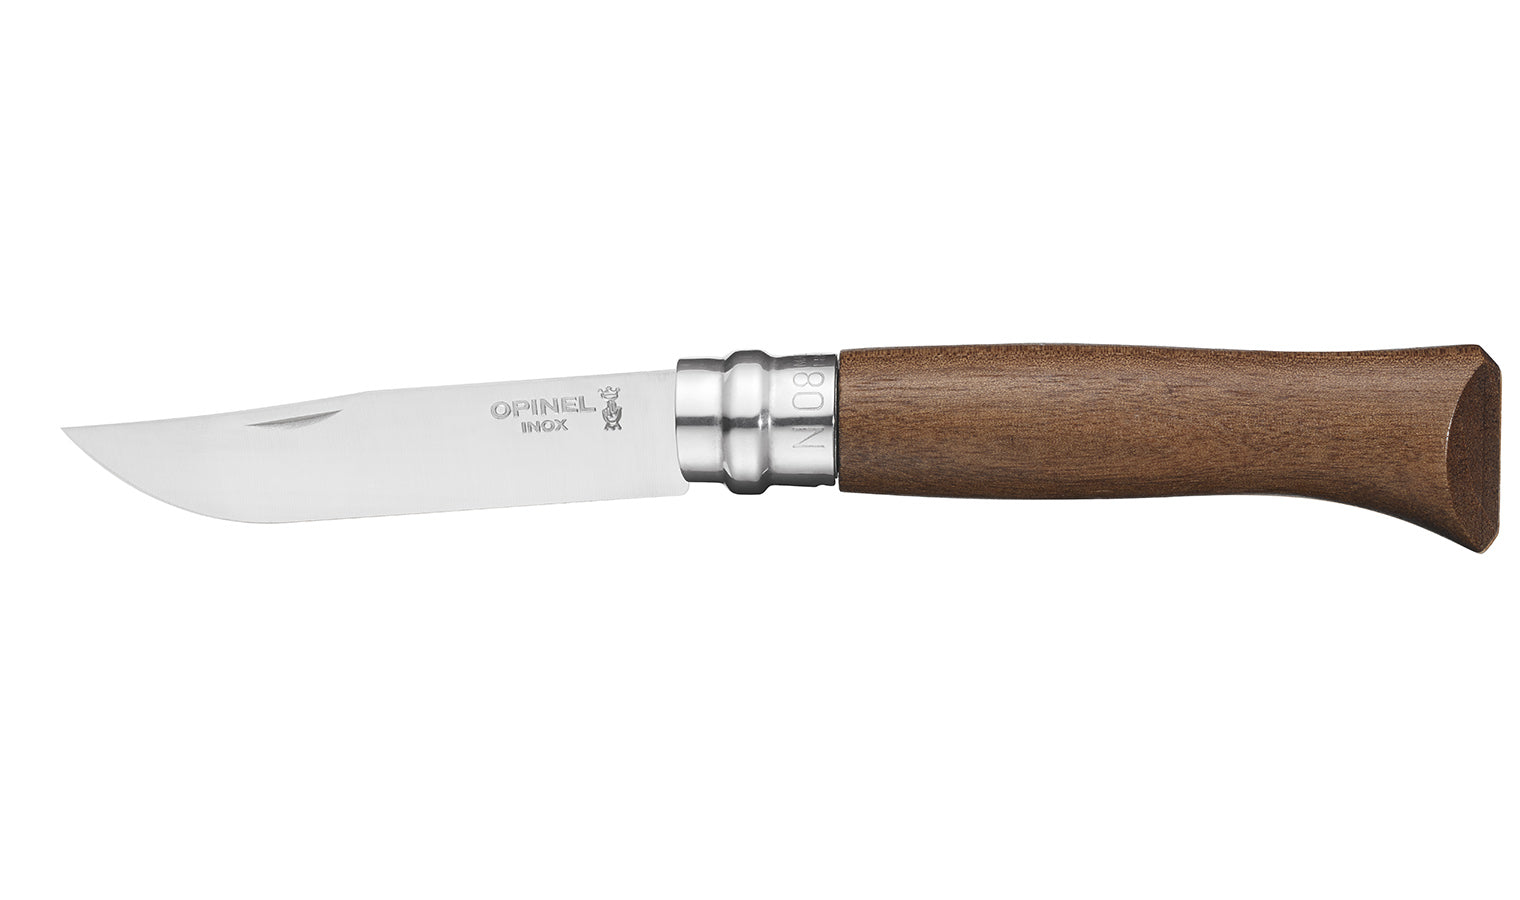 Opinel Couteau Fermant Luxe No 8 Manche Noyer – Lame Inox